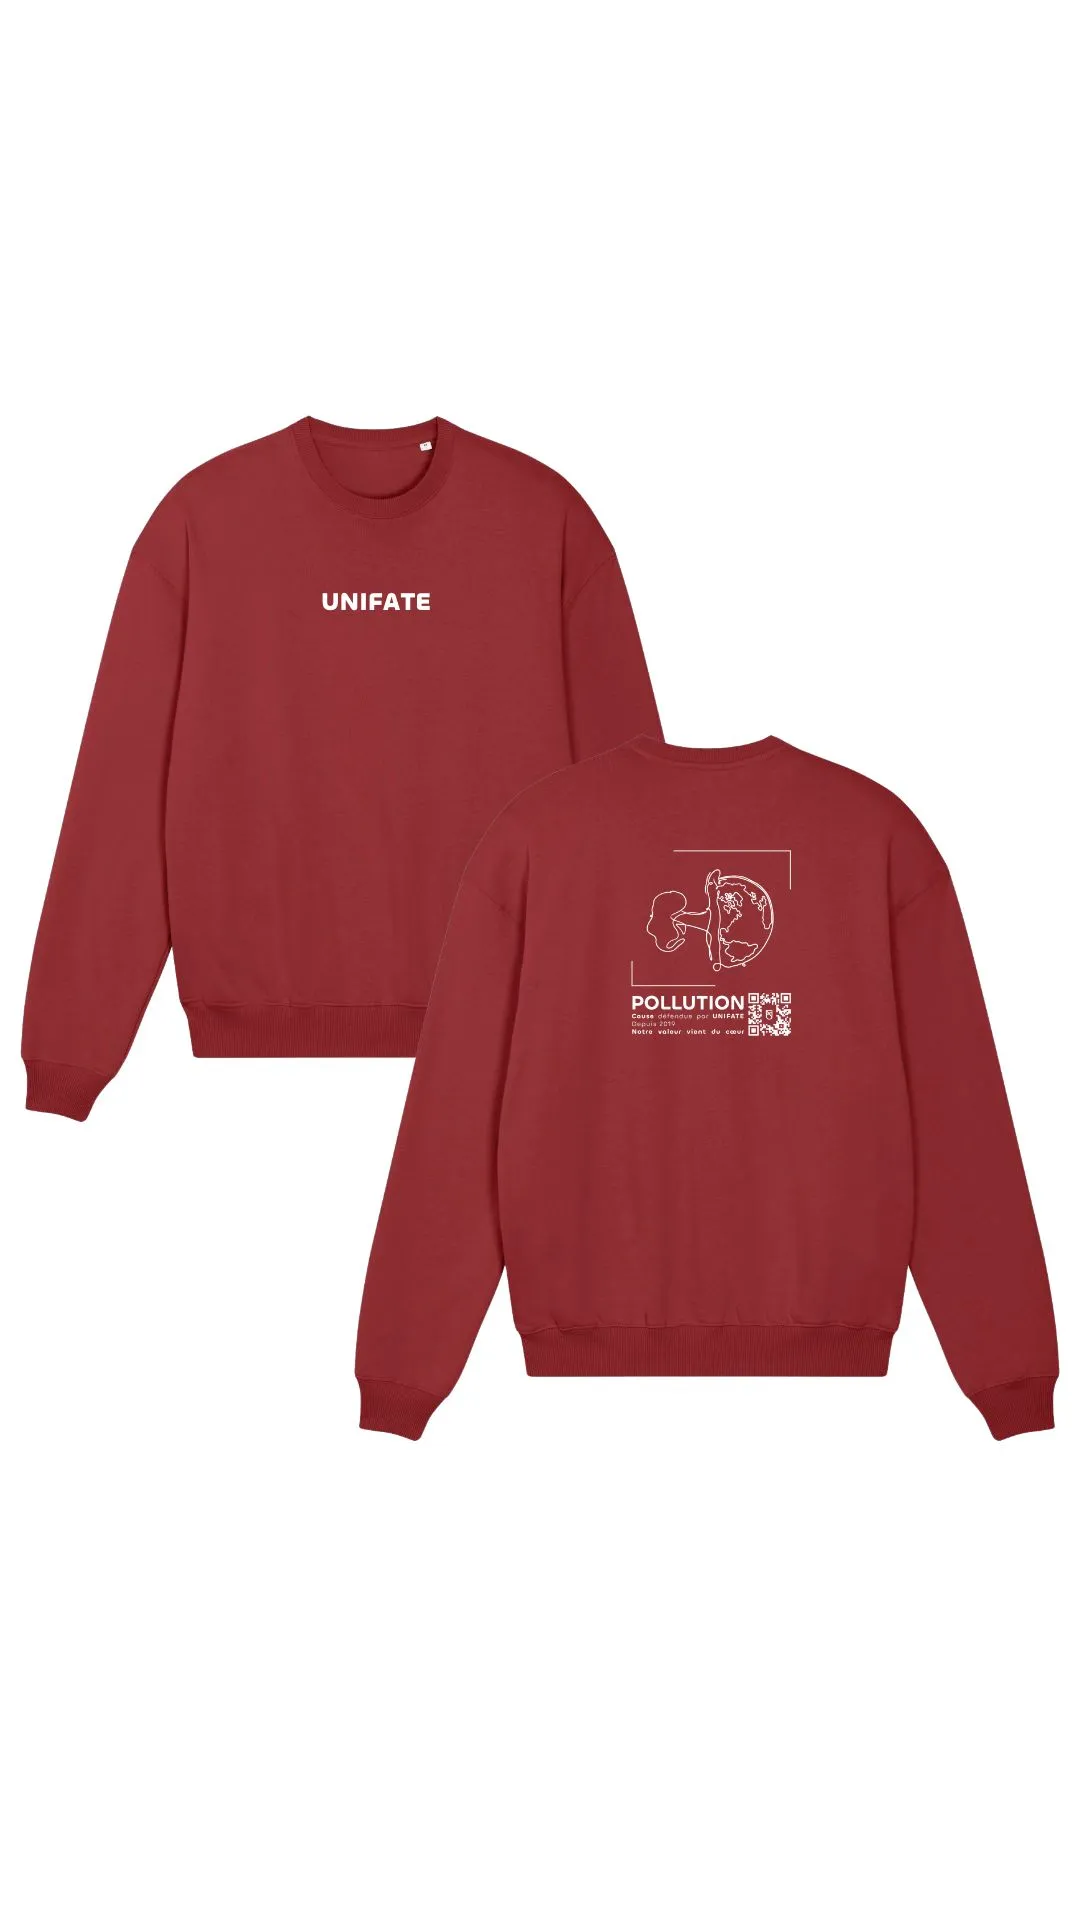 unifate-marque-responsable-rennes-collection-pollution-ete-sweat-rouge